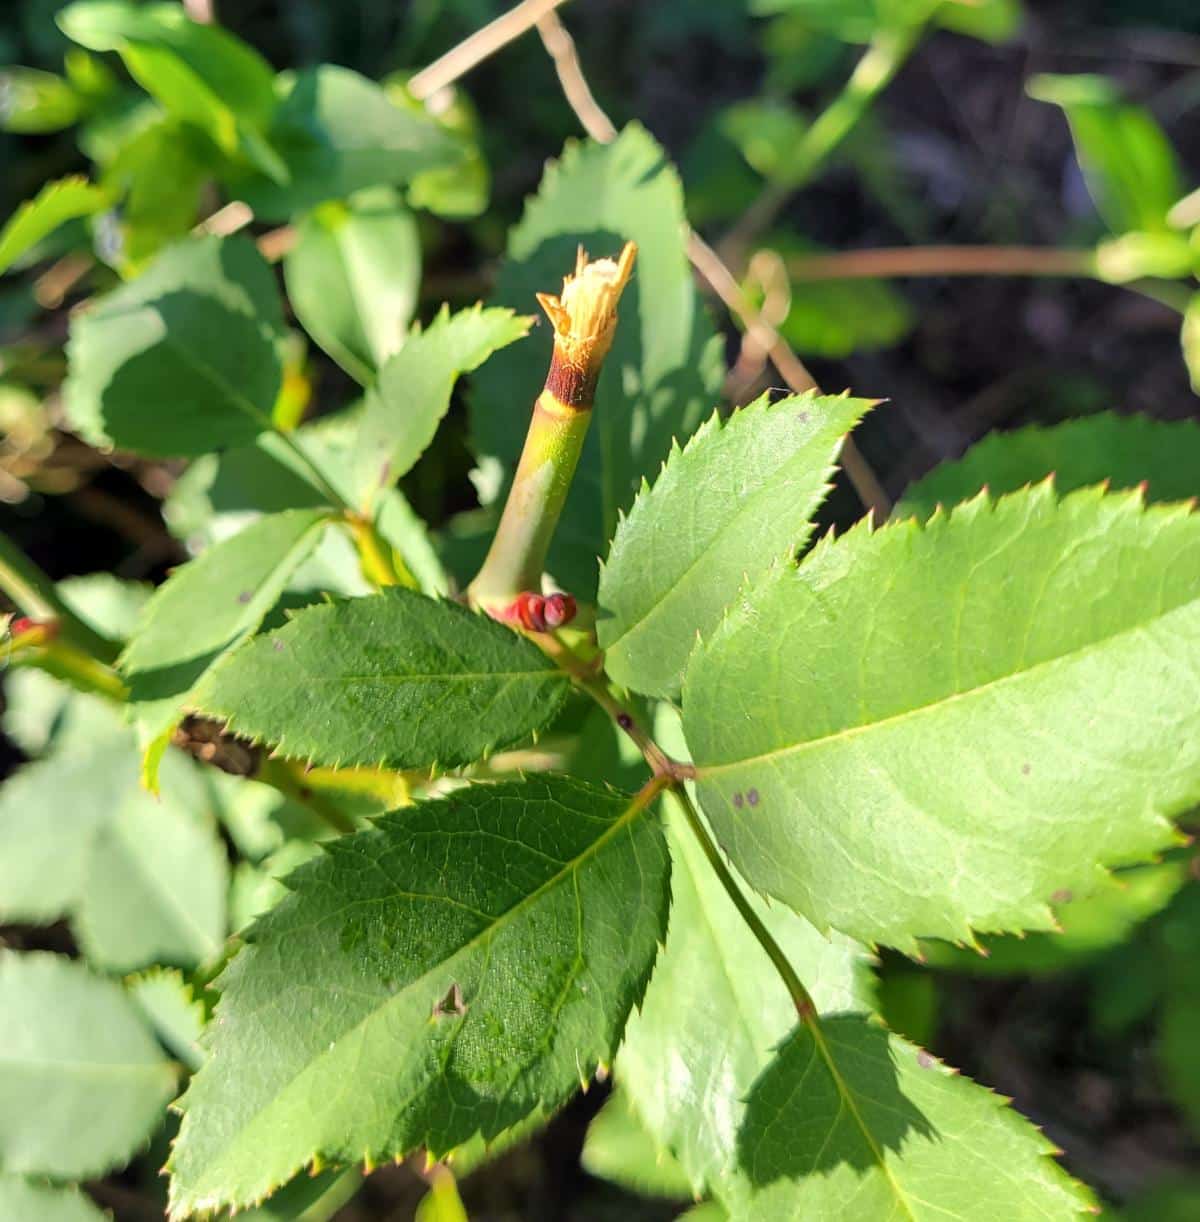 Example of damage caused by dull rose pruners